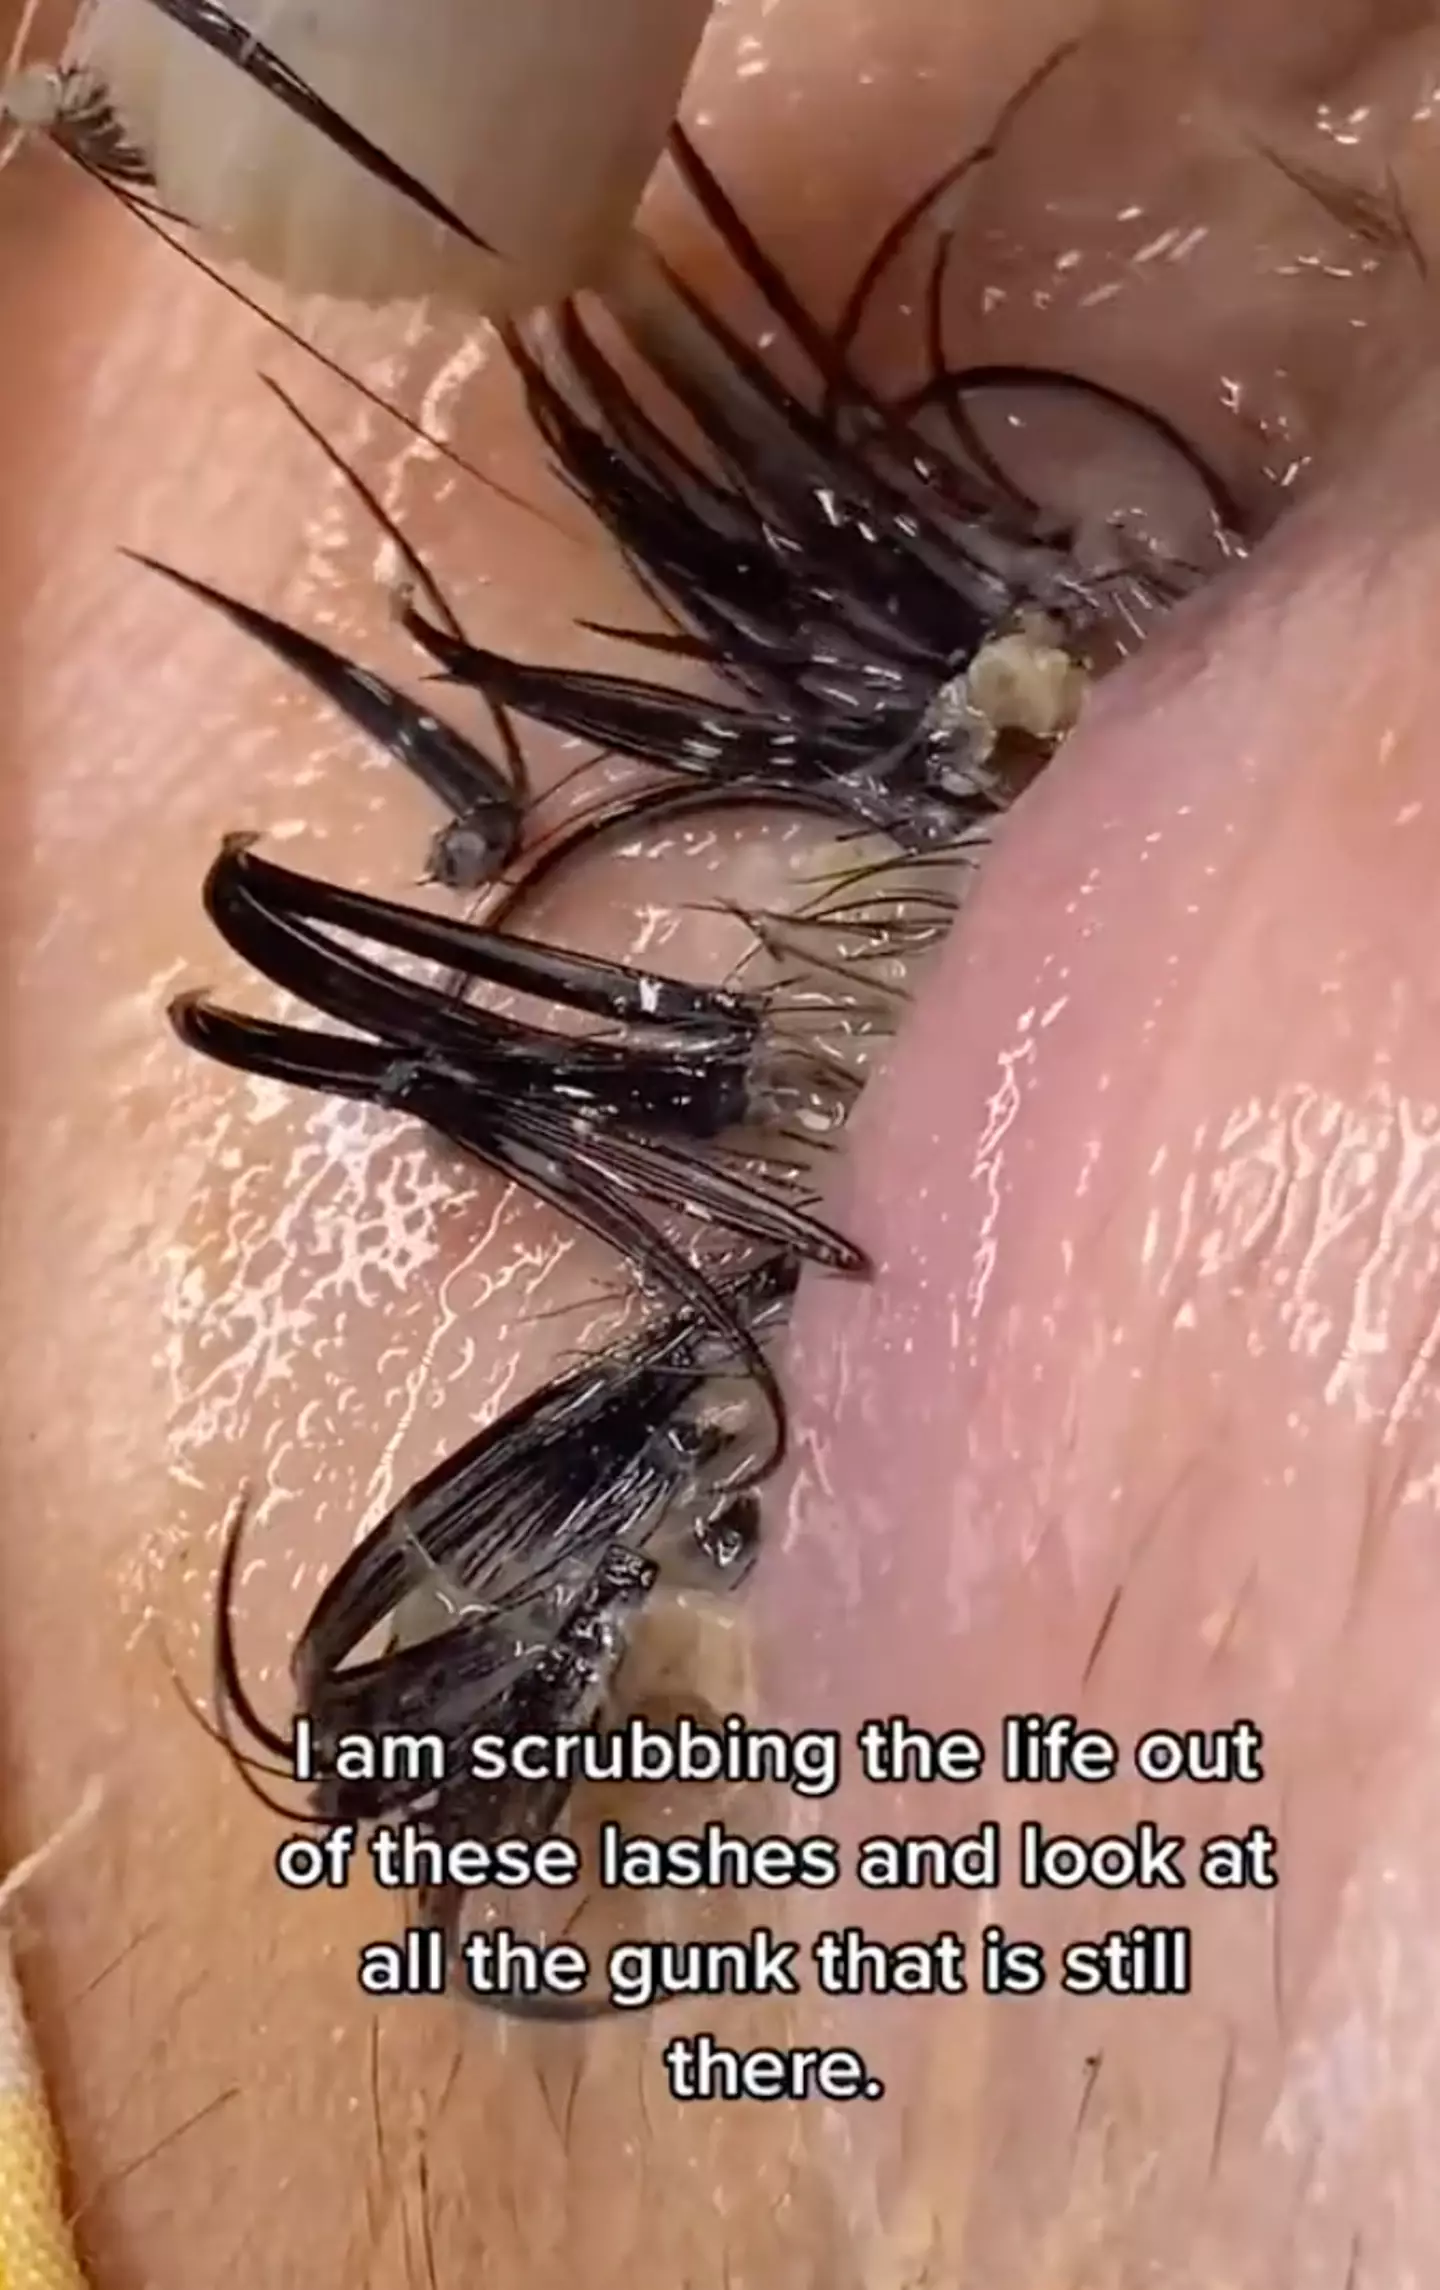 Ipek previously shared another video about what can happen if you don't clean and care for your lash extensions properly.